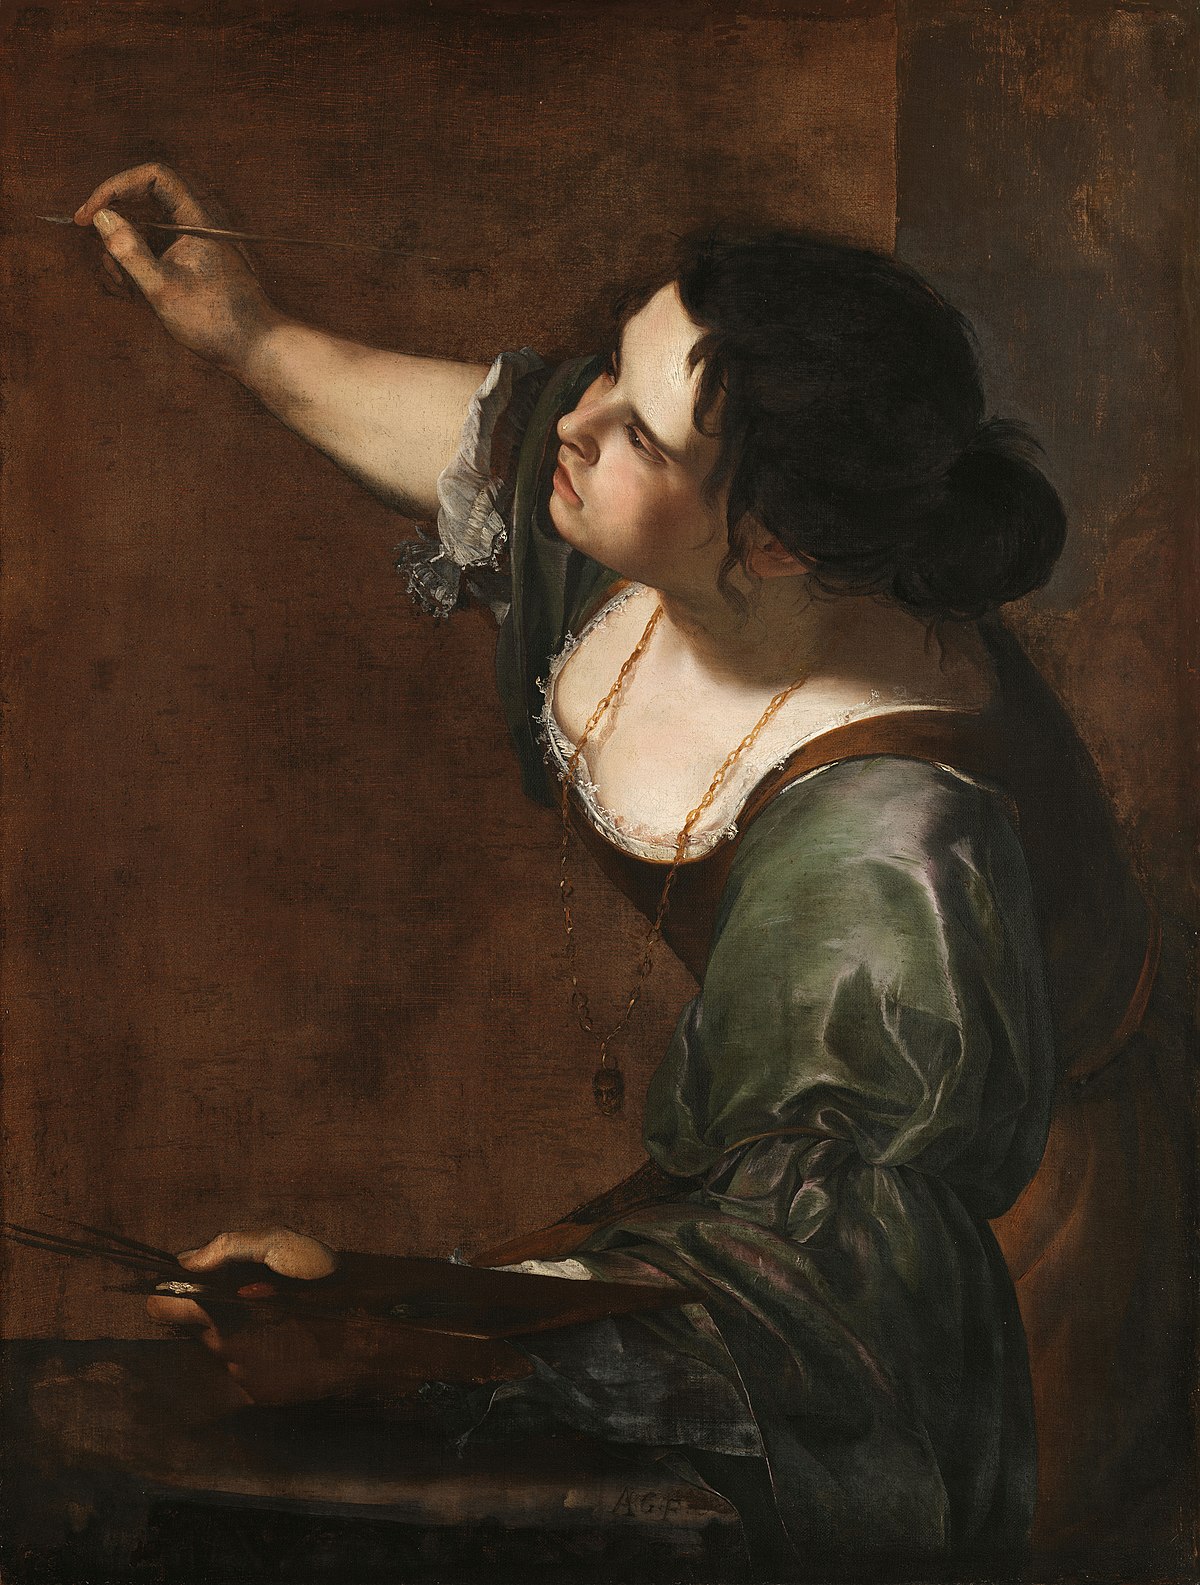 Self Portrait as the alegory of art